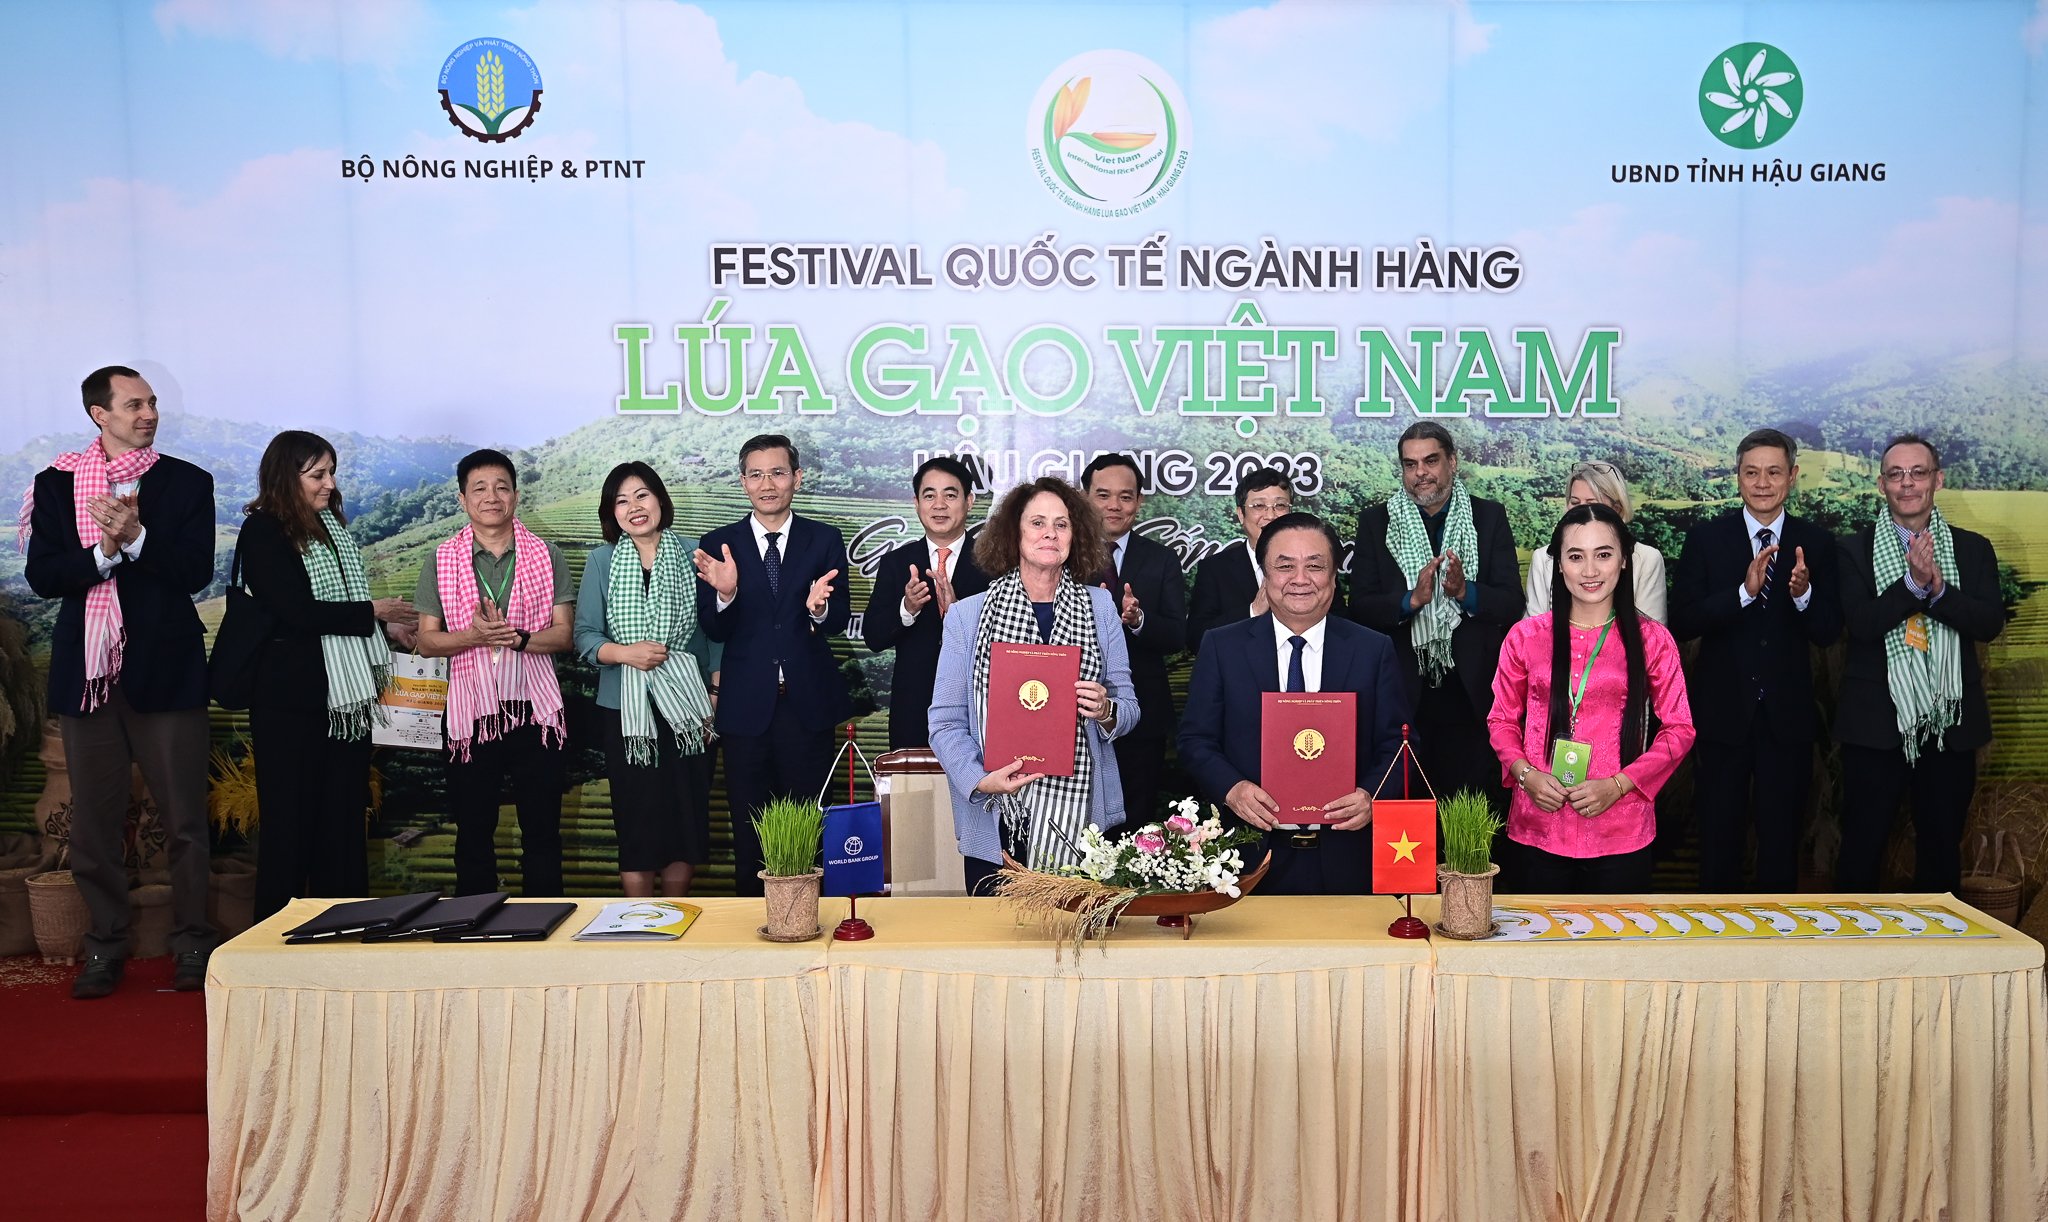 World Bank Country Director (left) and Minister of Vietnam Agriculture and Rural Development signed the commitments to implement the Program on 1 million ha of high-quality and low-carbon rice in the Mekong Delta during the International Rice Festival.